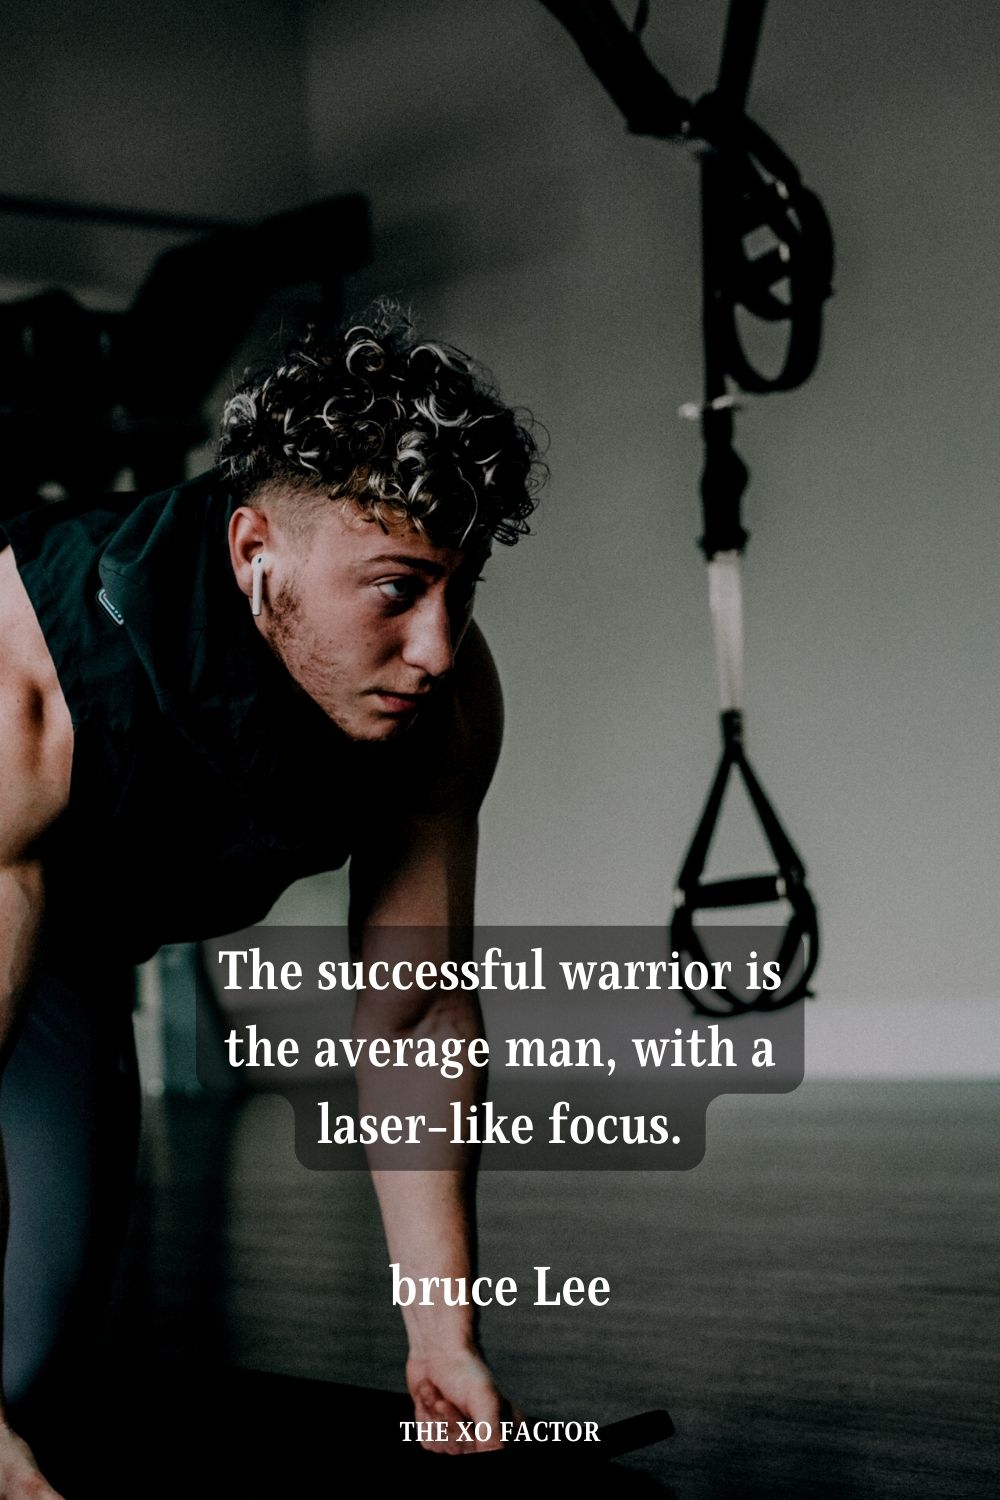 The successful warrior is the average man, with a laser-like focus. bruce Lee